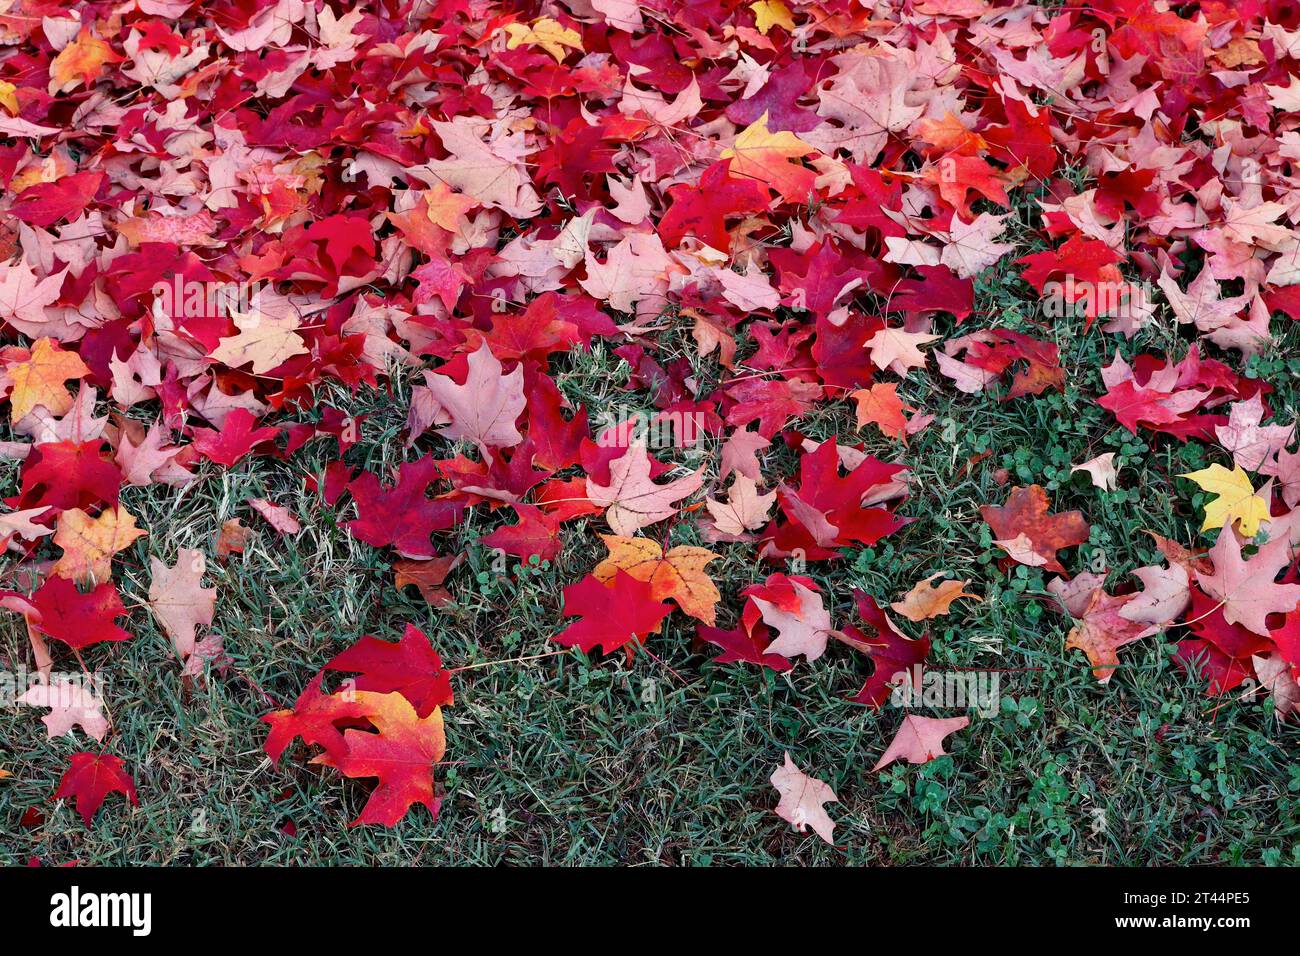 Red Maple Leaves Scattered on Ground in Autumn Stock Photo